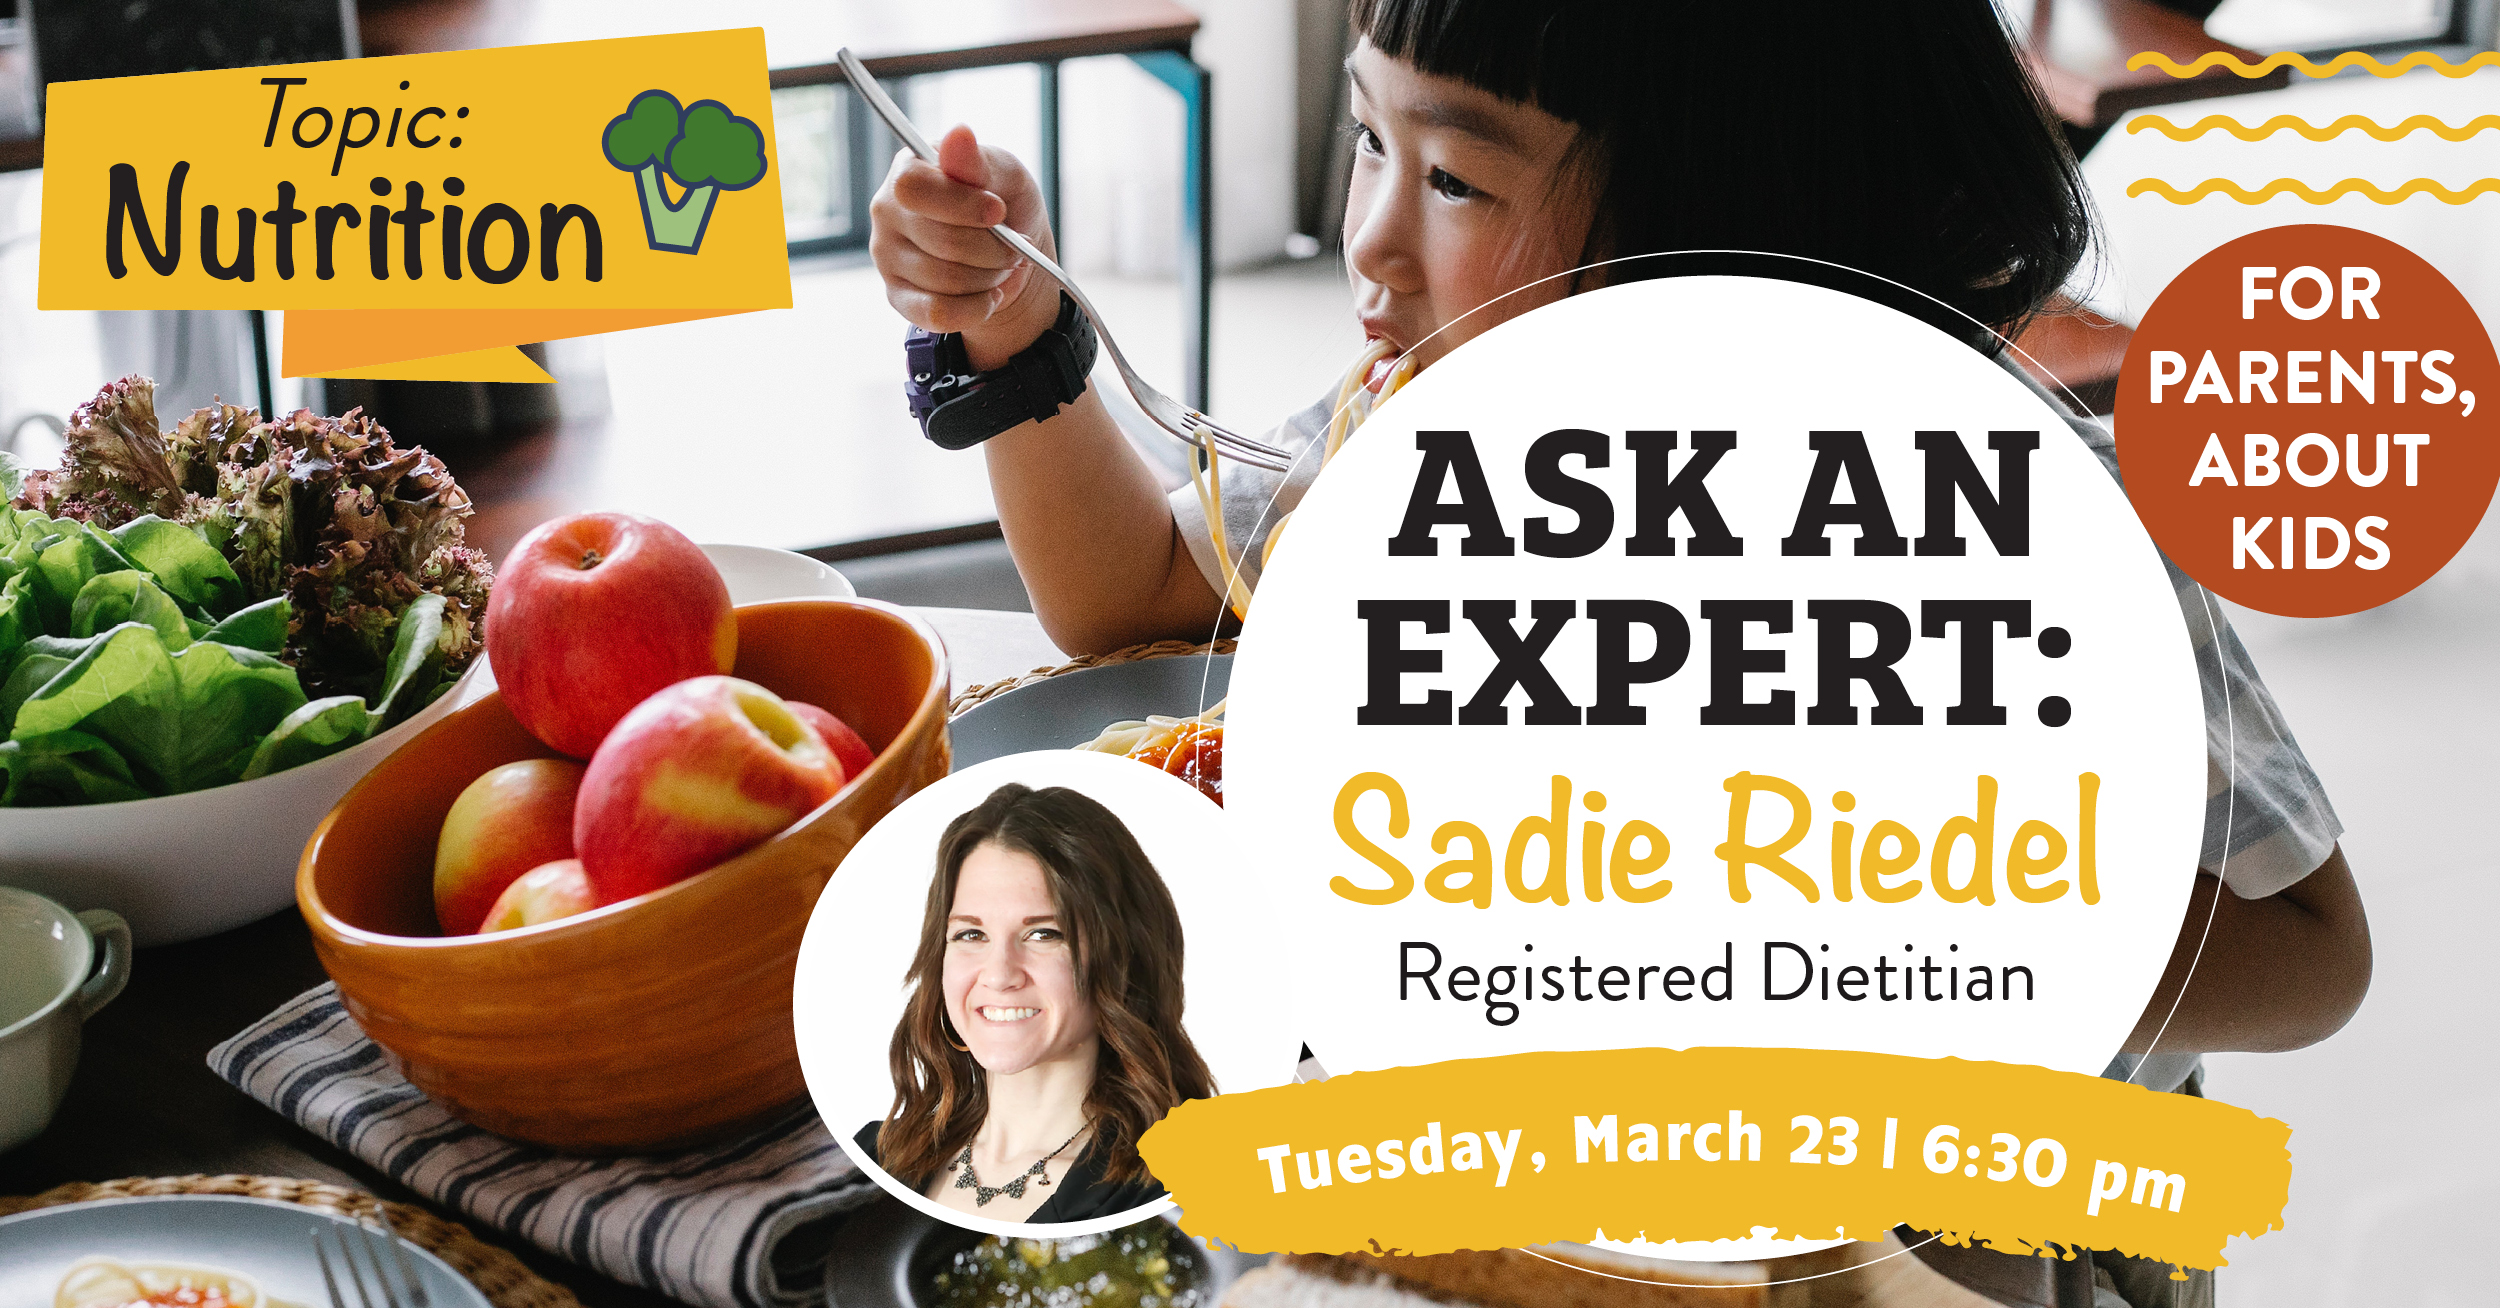 Ask an Expert. For parents, about kids. Topic Nutrition. Sadie Riedel, Registered Dietitian. Tuesday, March 23 at 6:30pm